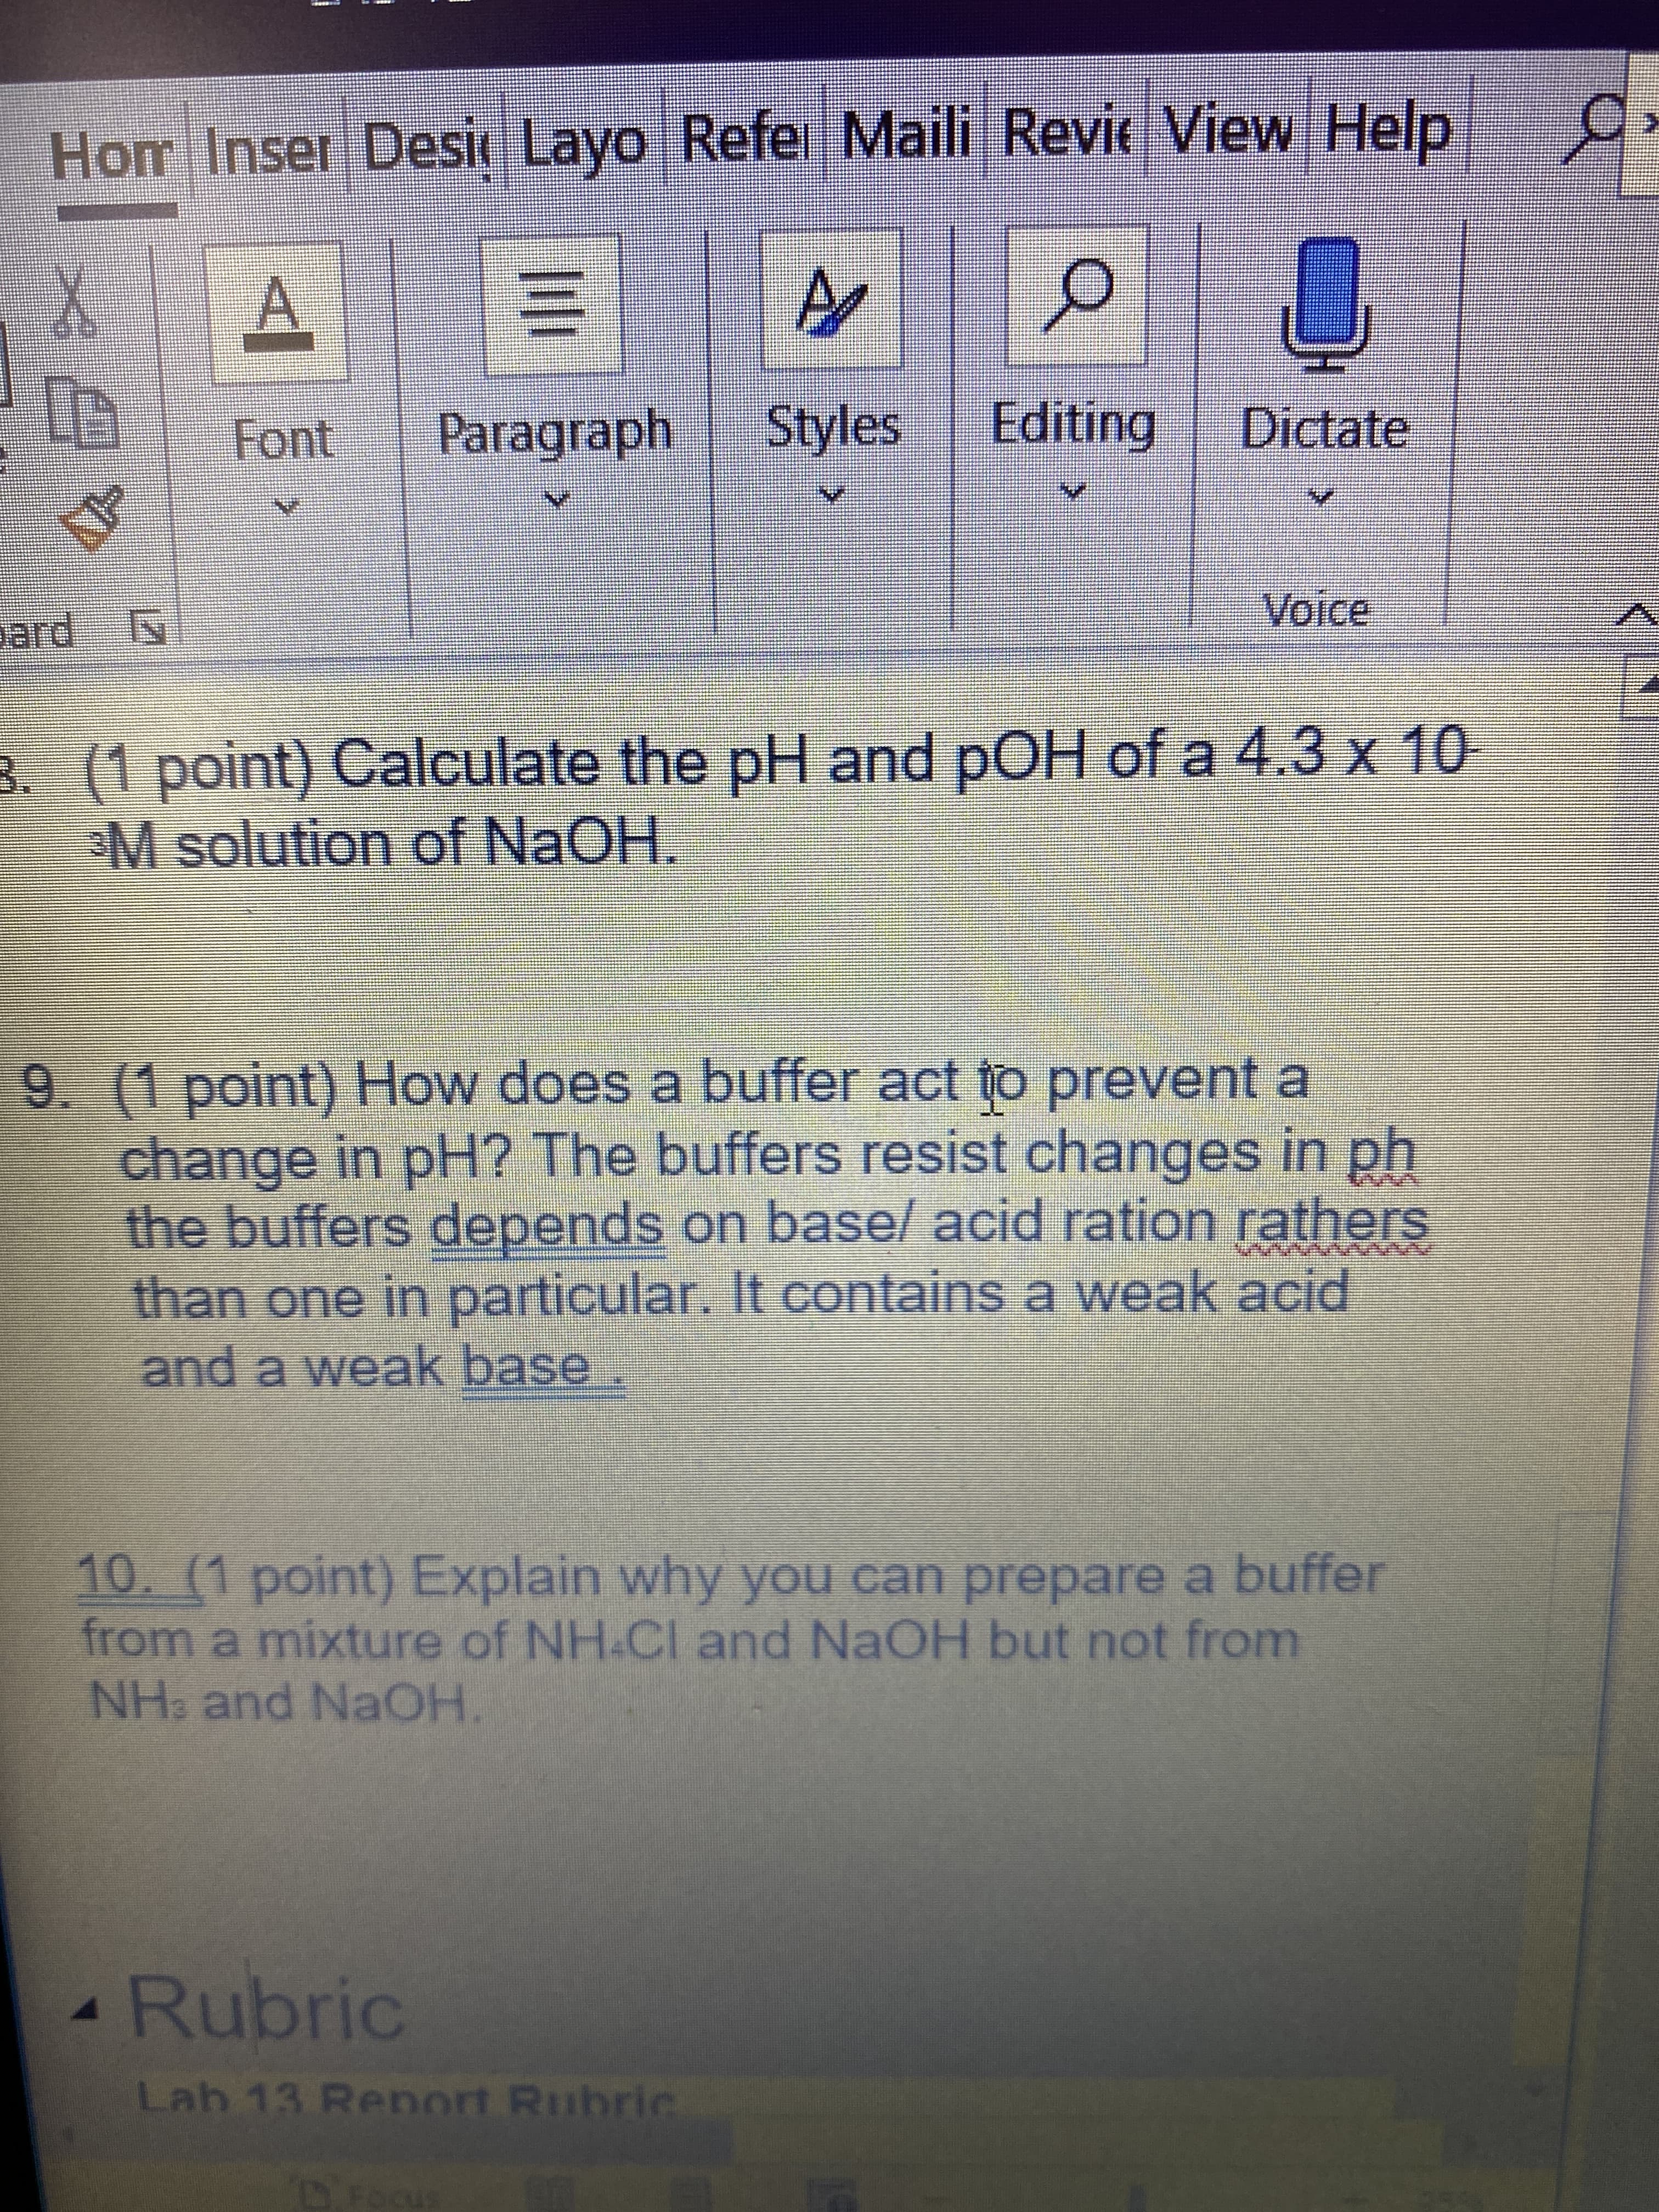 (1point) Calculate the pH and pOH of a 4.3 x 10
M solution of NaOH.
